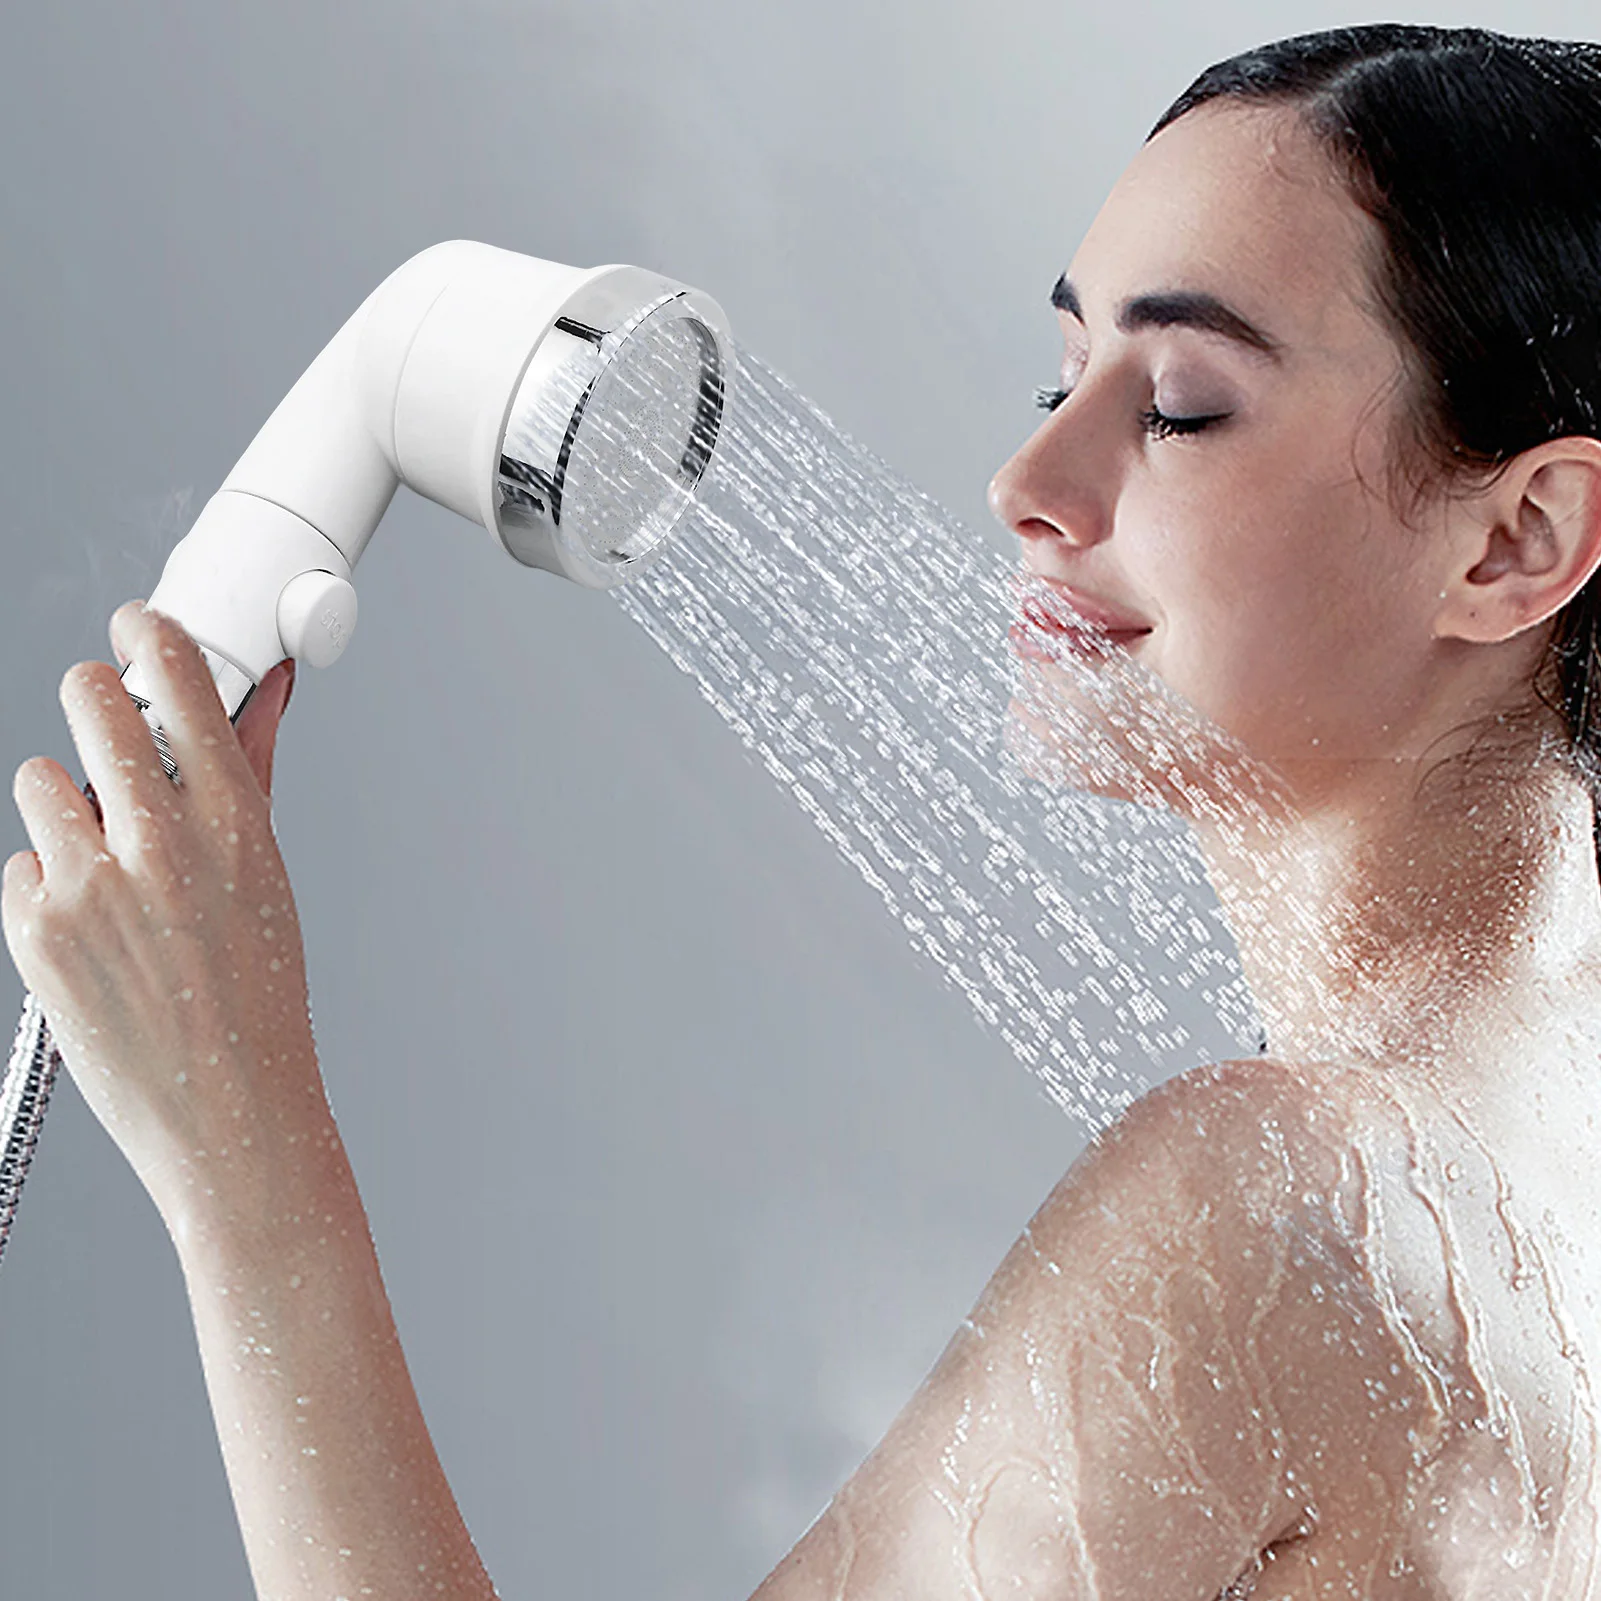 

Bathroom Pressurized Water Stop Shower Head Shampoo Bed Hair Salon Barber Shop Faucet Three Mode Nozzle Household Accessories